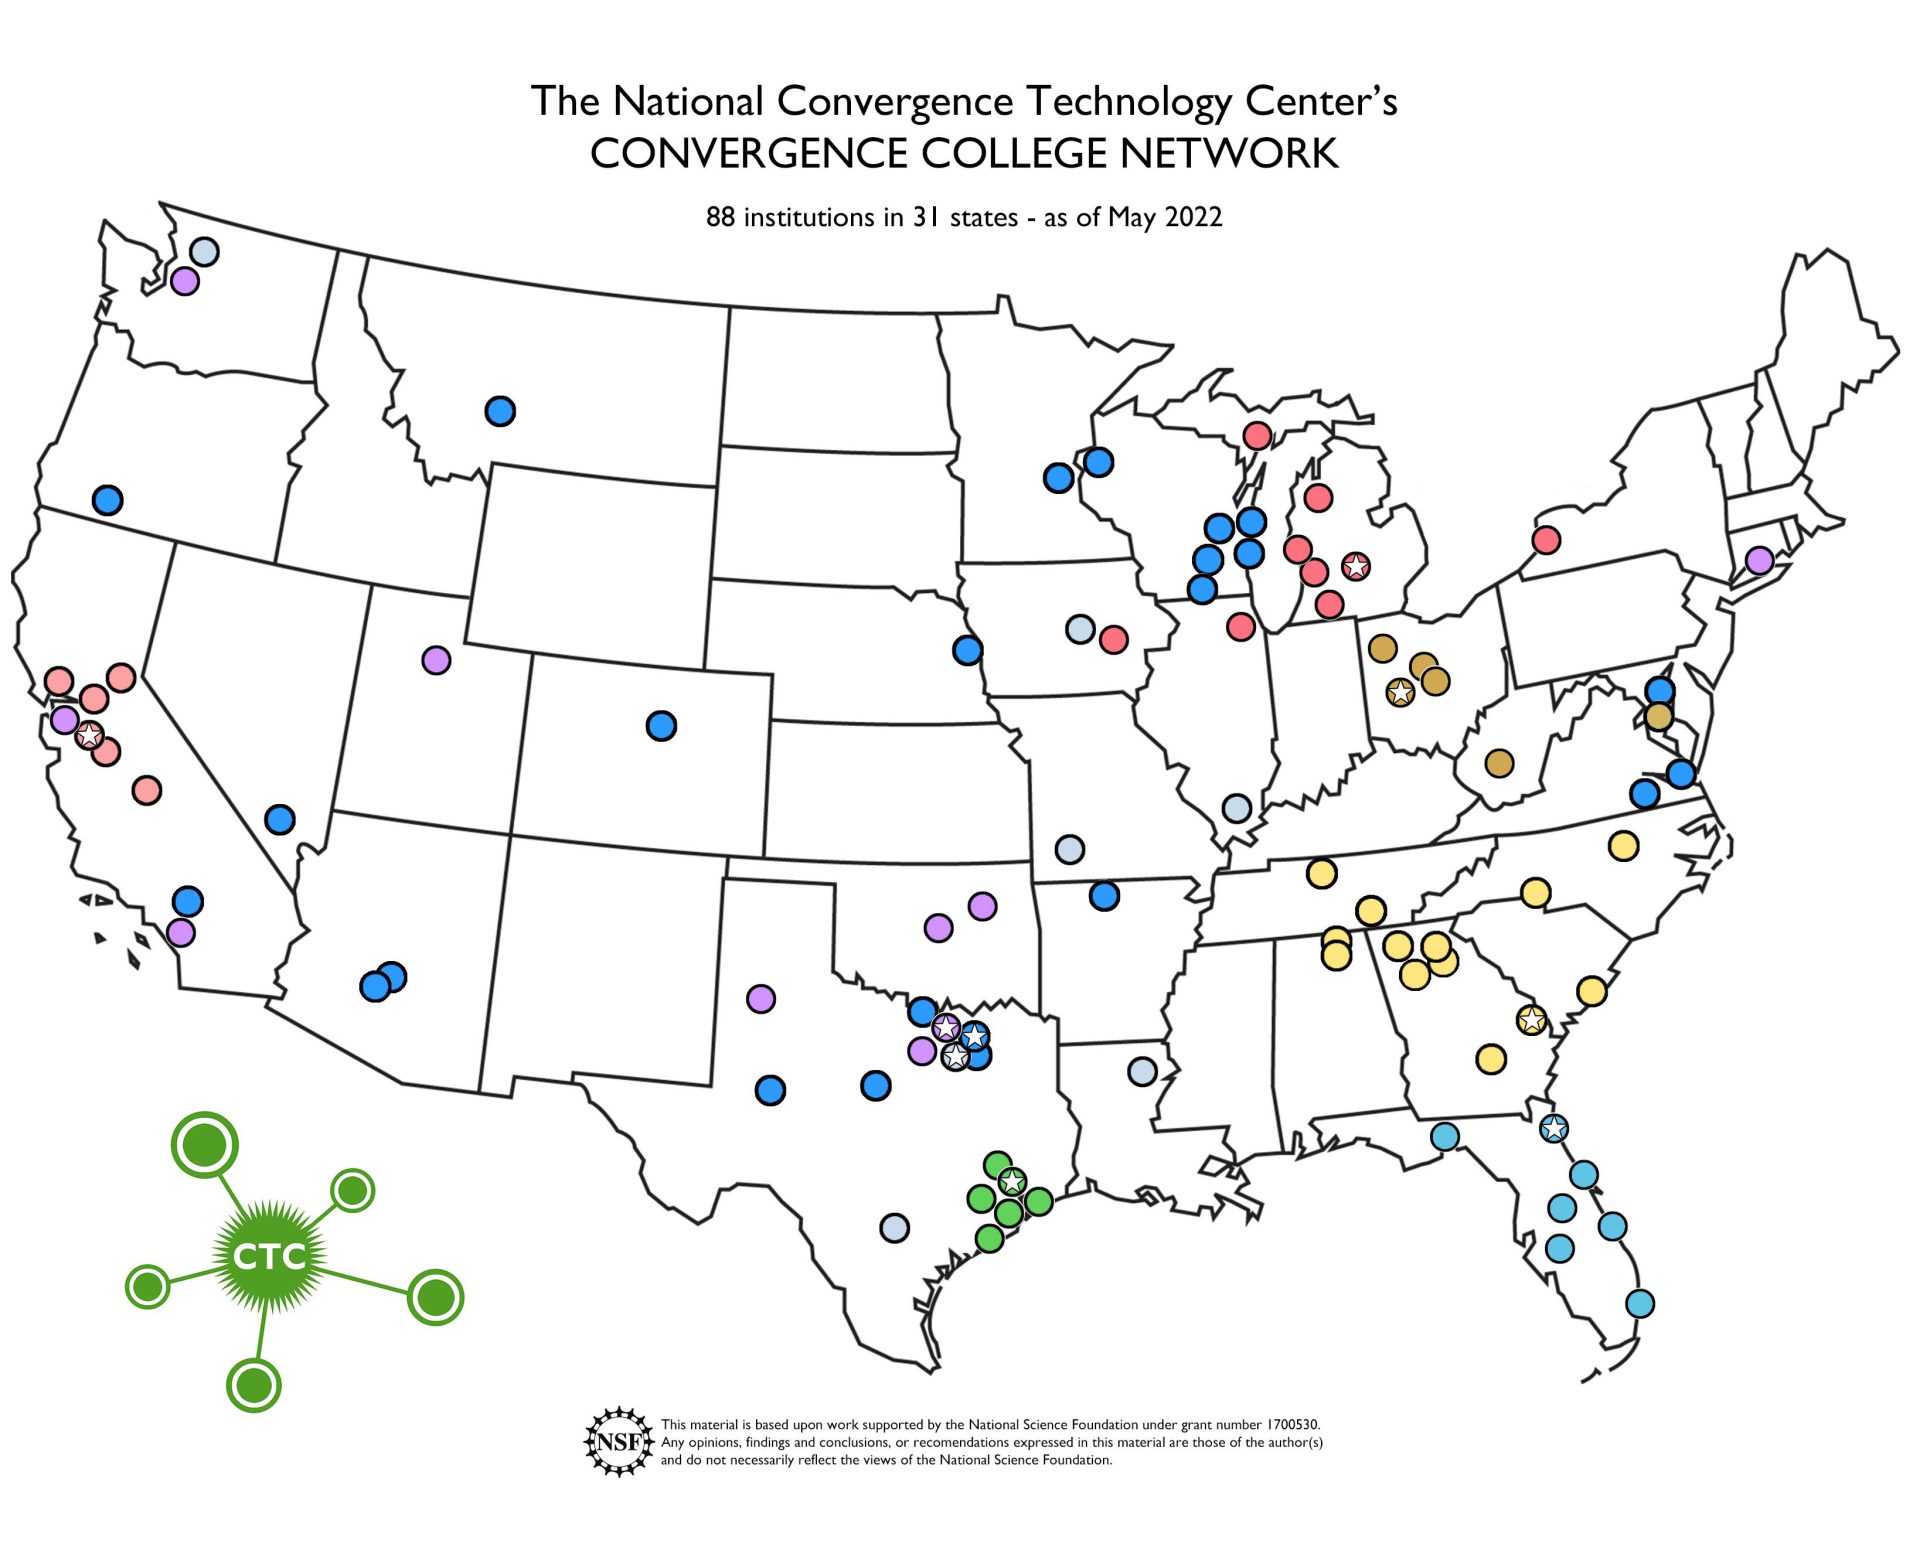 A map of the United States with colored dots indicating each Convergence College Network member school. There is the National Convergence Technology Center's light green logo on the side with CTC in the middle of it.